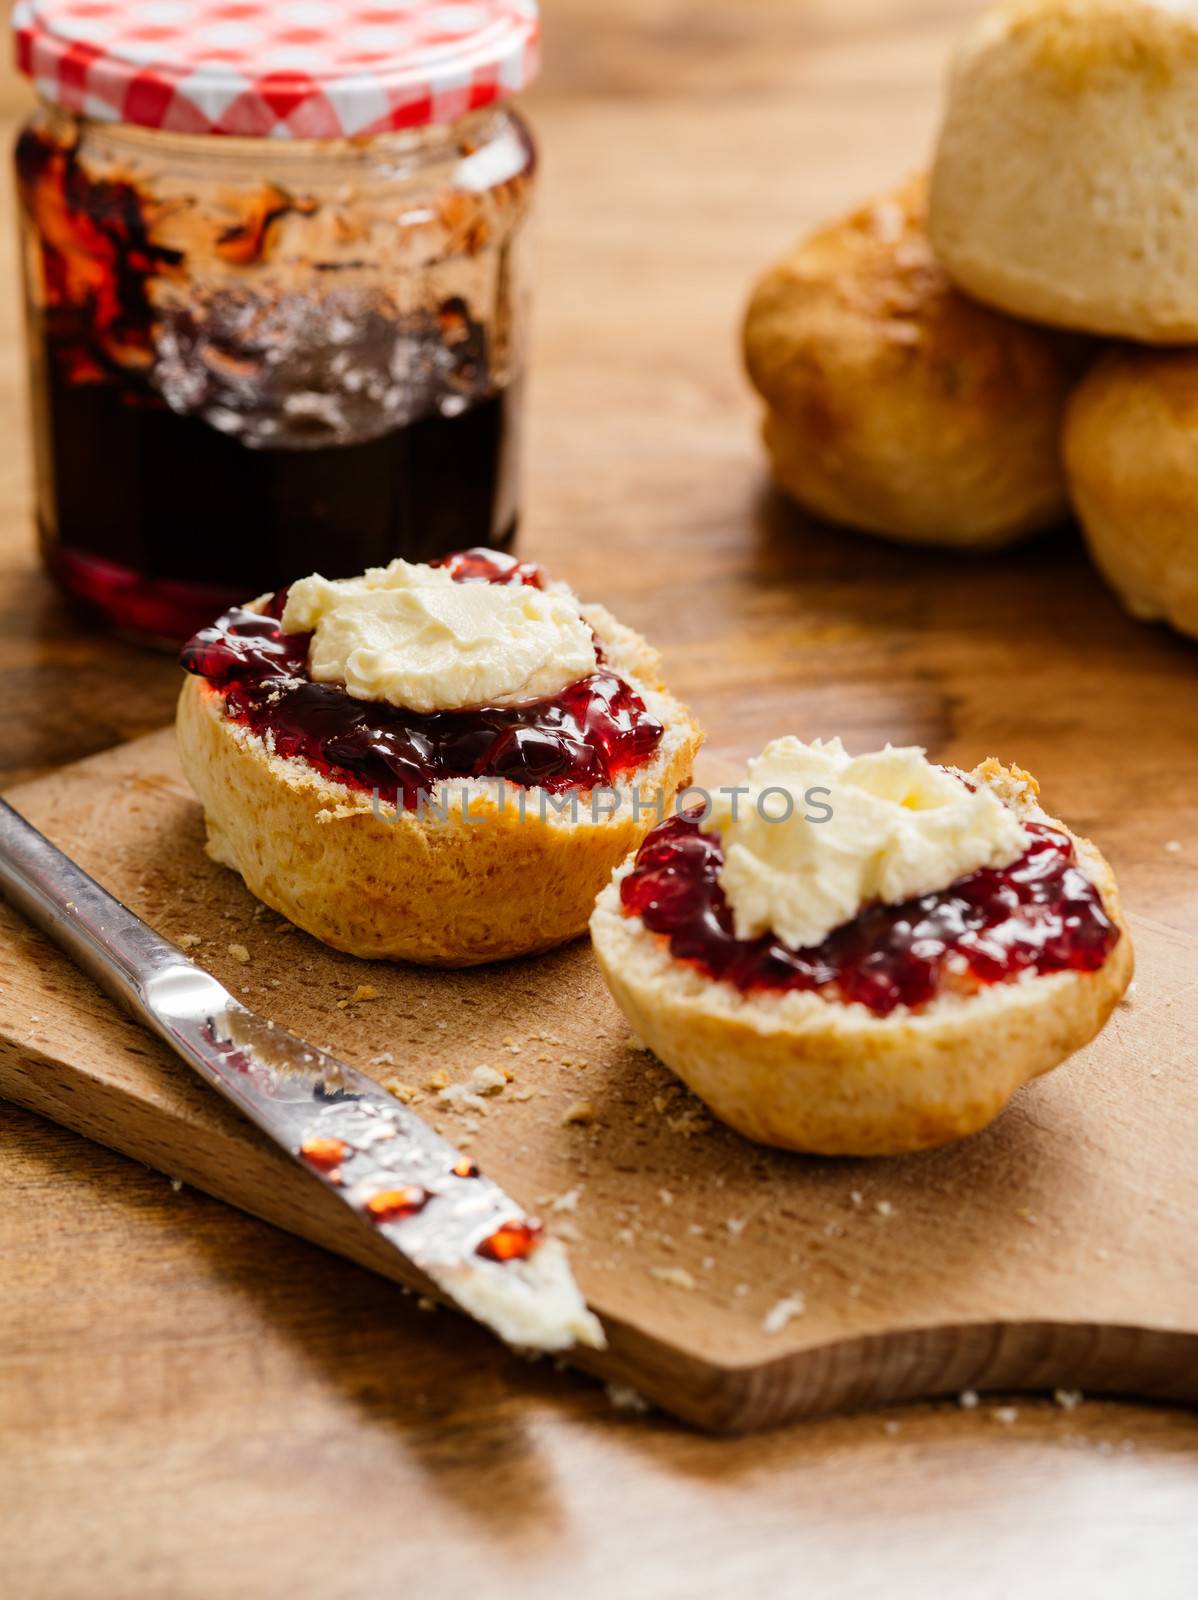 Two scones prepared with clotted cream and jam by sumners